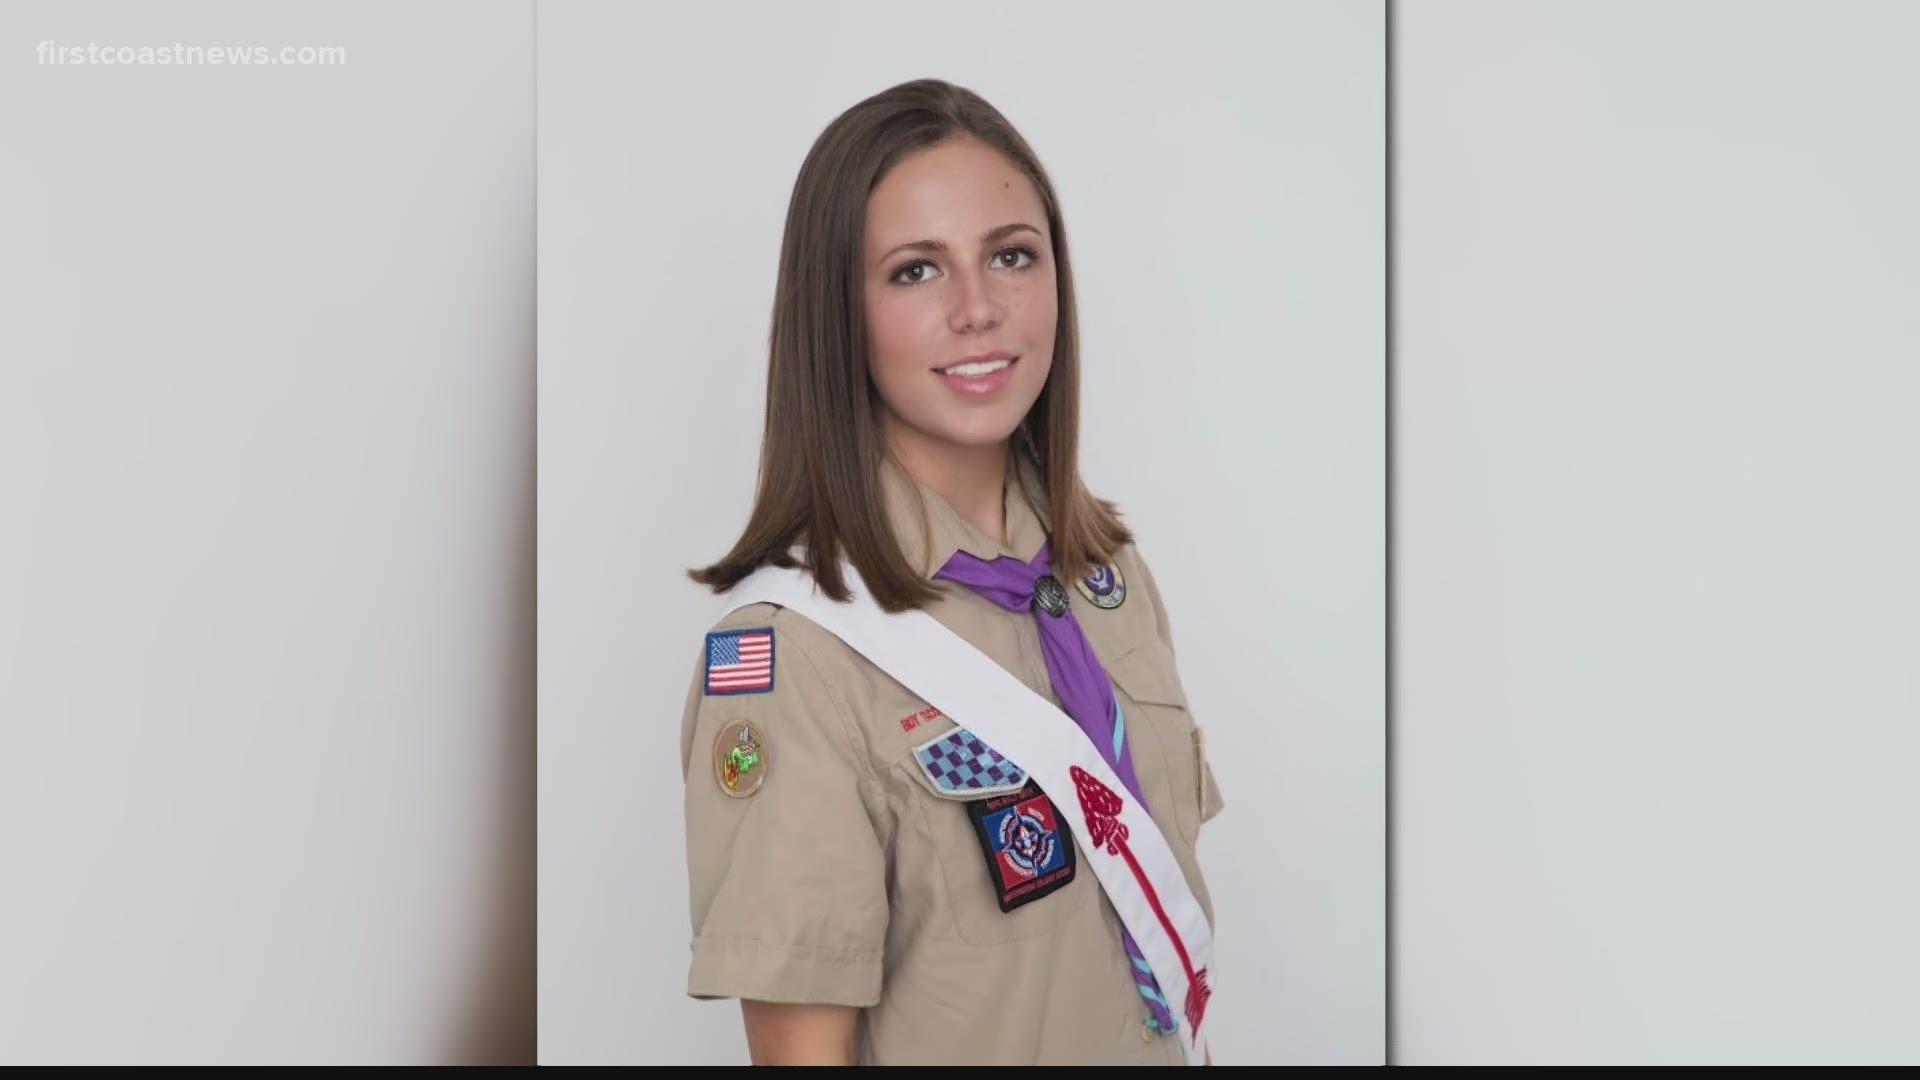 Courtney Laird, 15, will become one of the first girls to join the Eagle Scouts, paving way to a new generation.